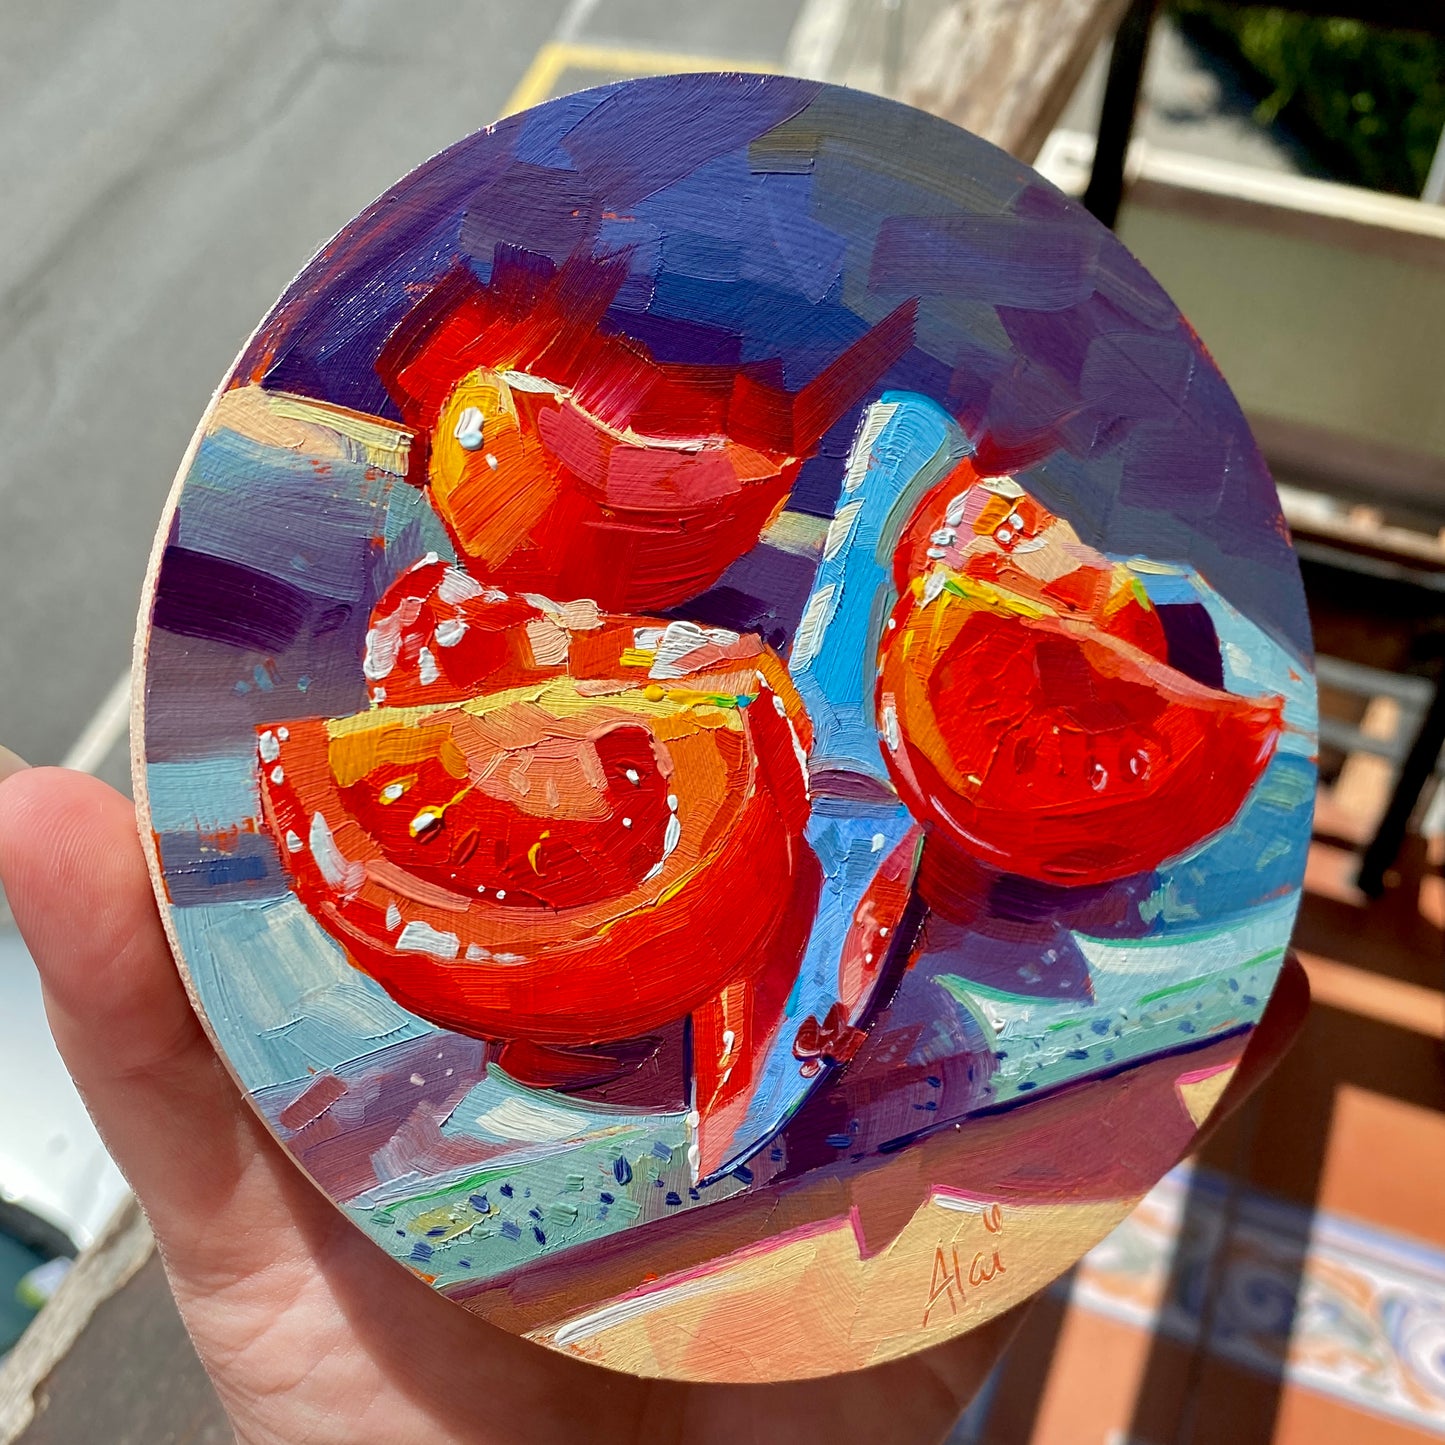 Tomato slices and knife - Original Oil Painting